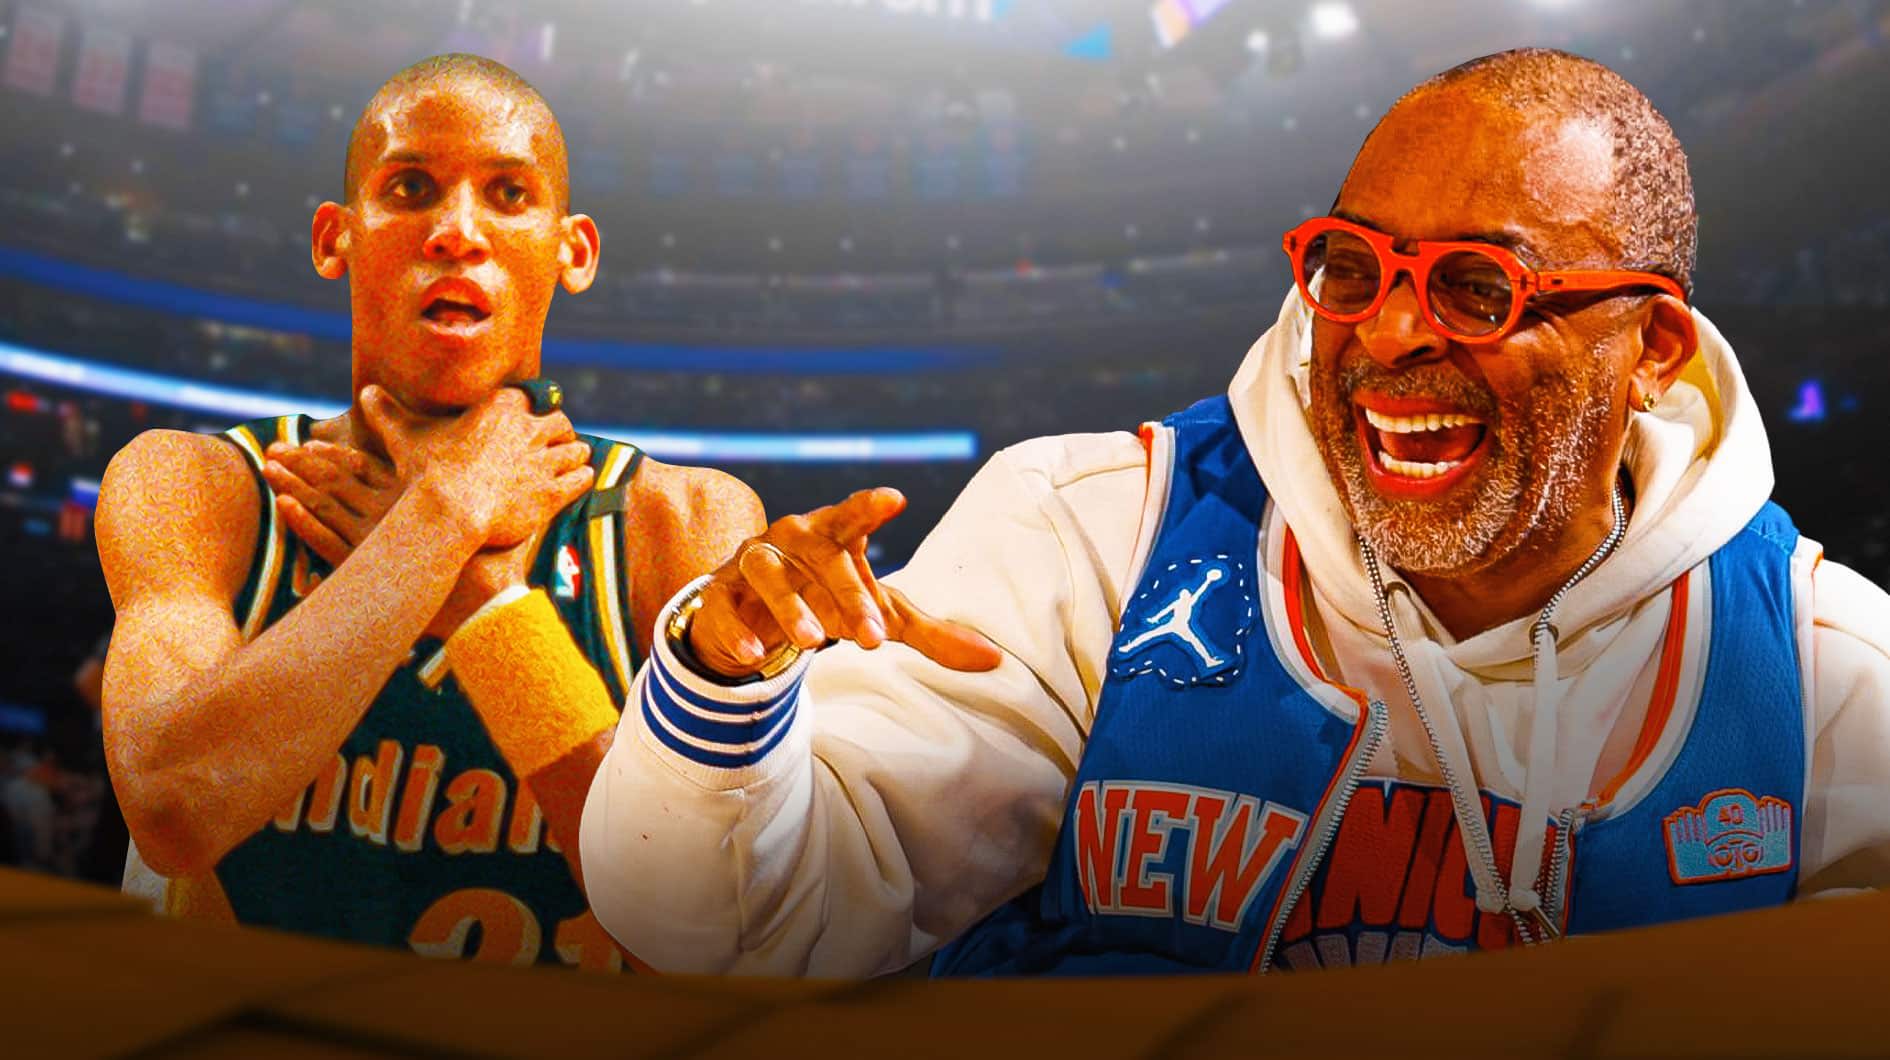 Spike Lee shows up with hilarious surprise for Reggie Miller ahead of Knicks' Game 2 vs Pacers